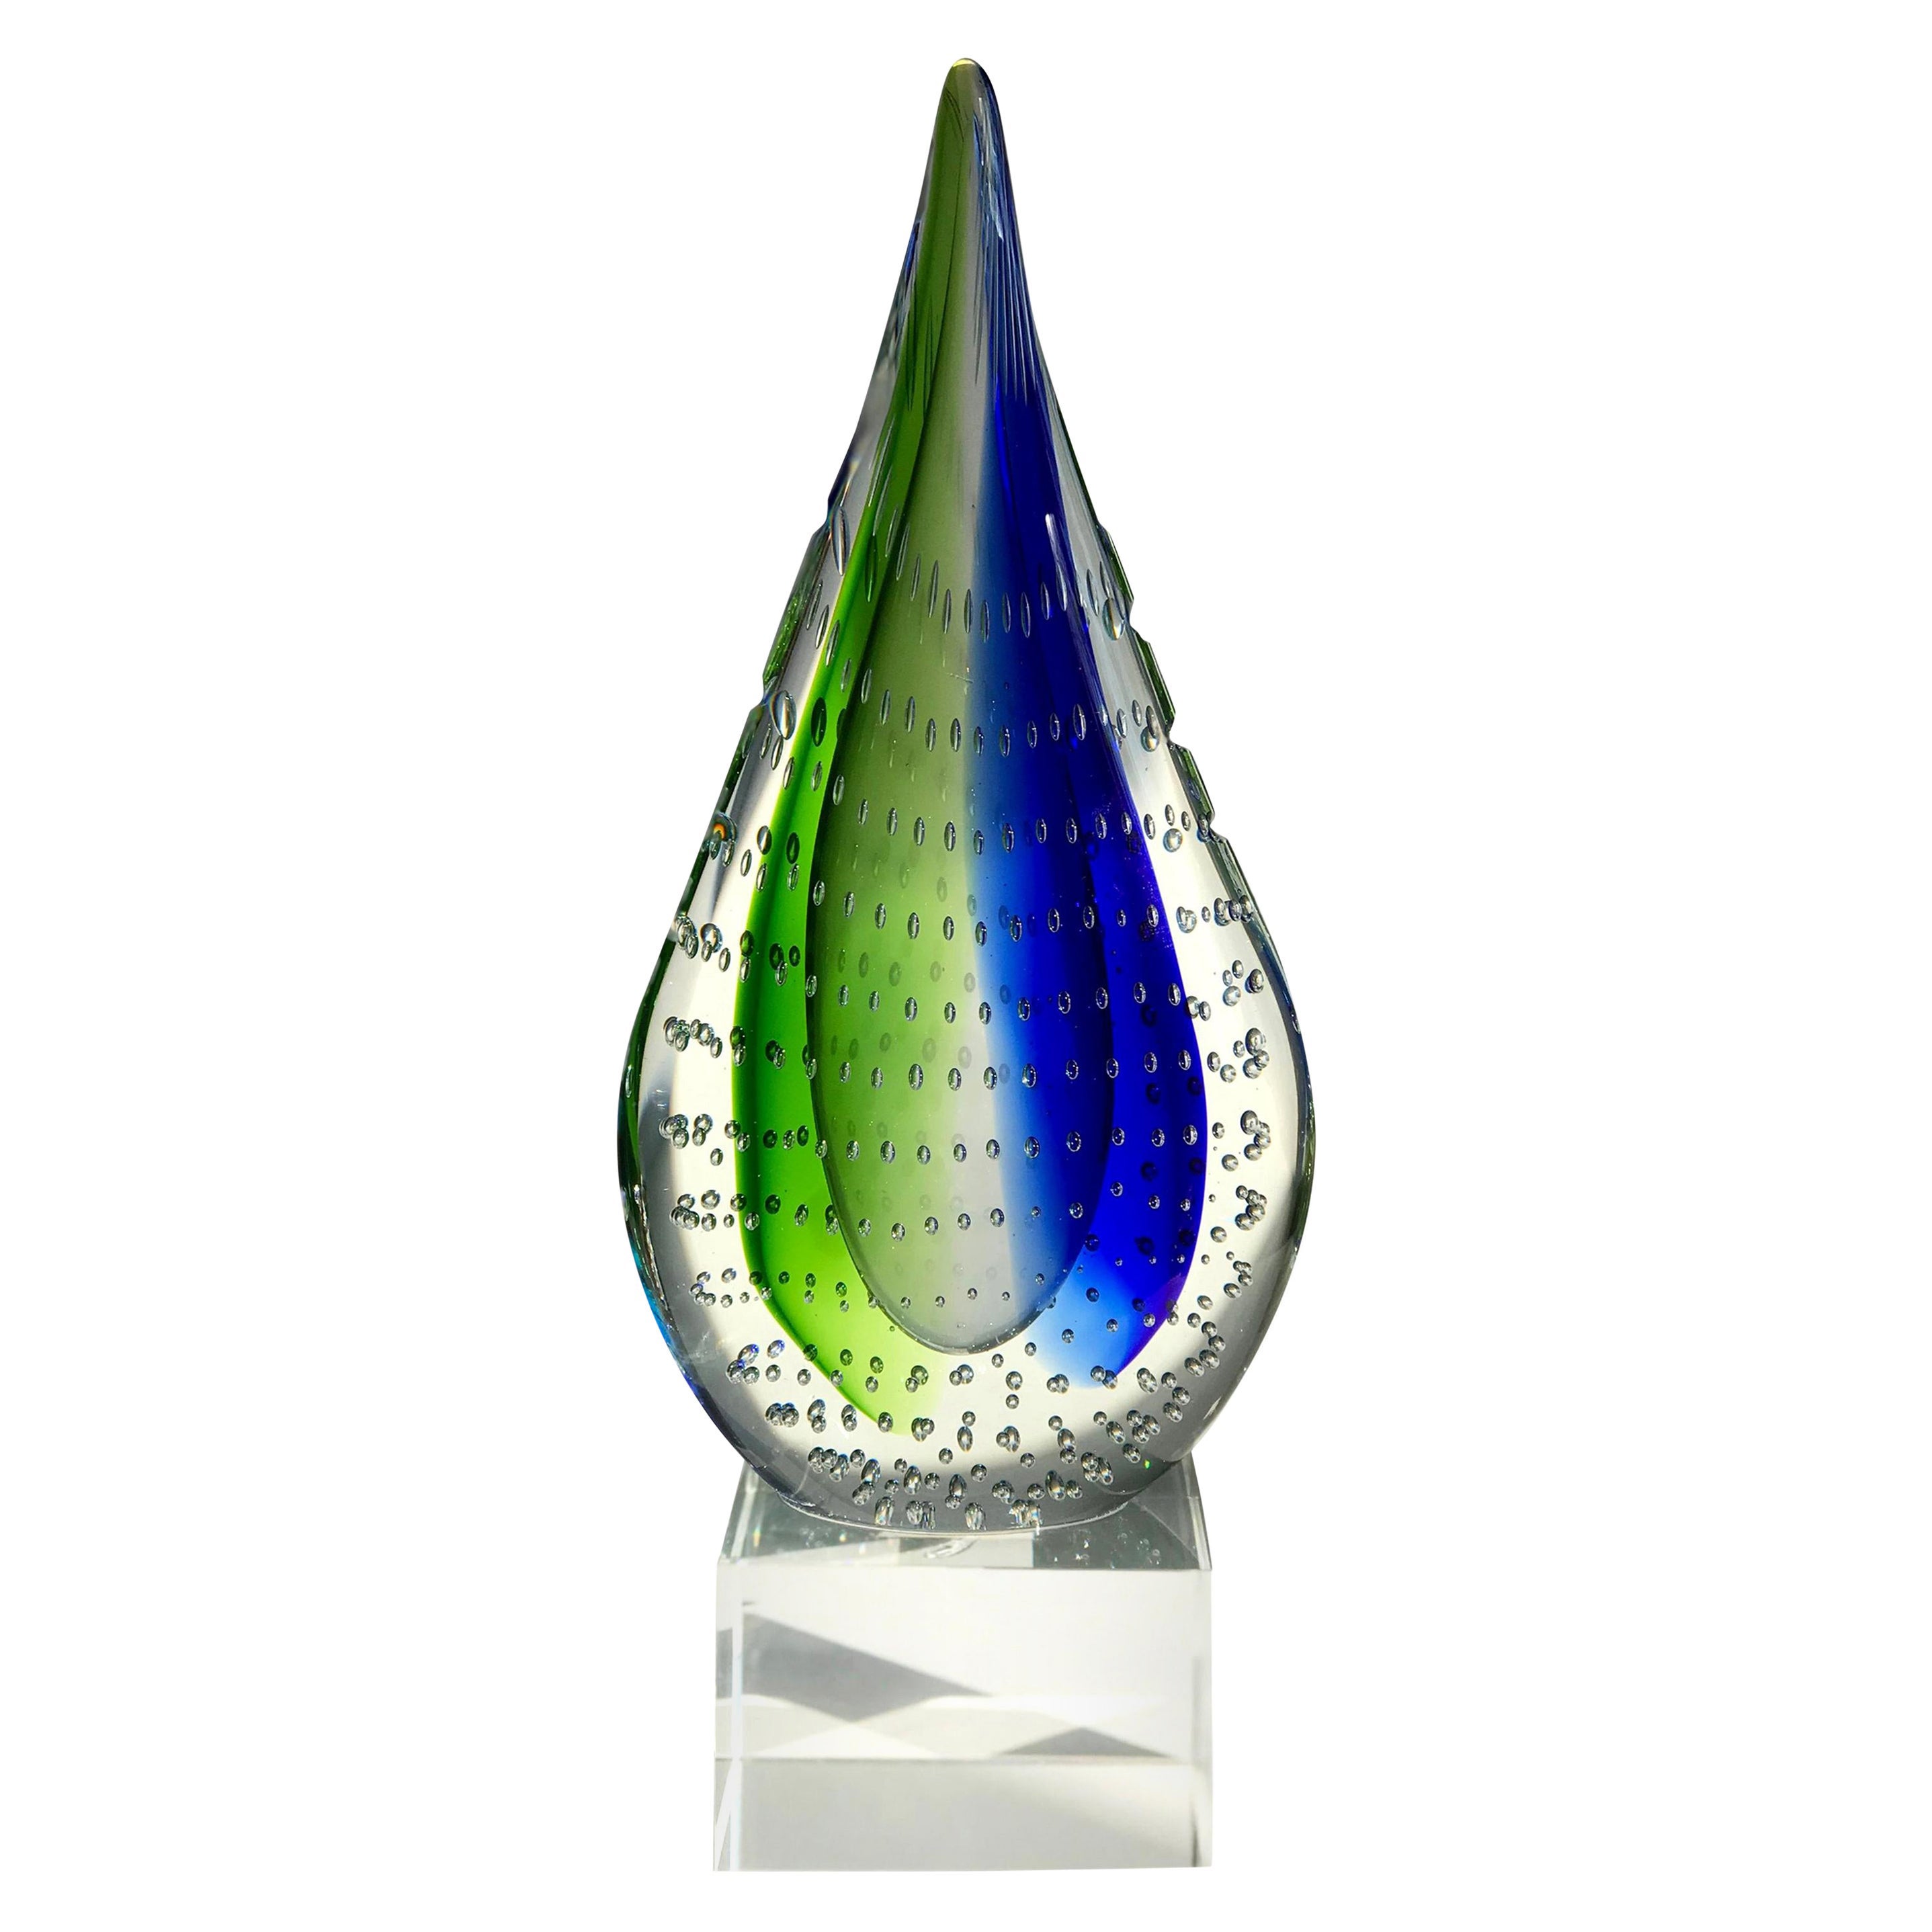 Teardrop Murano Sculpture in Green and Blue Sommerso Glass, Italy, c. 1980s